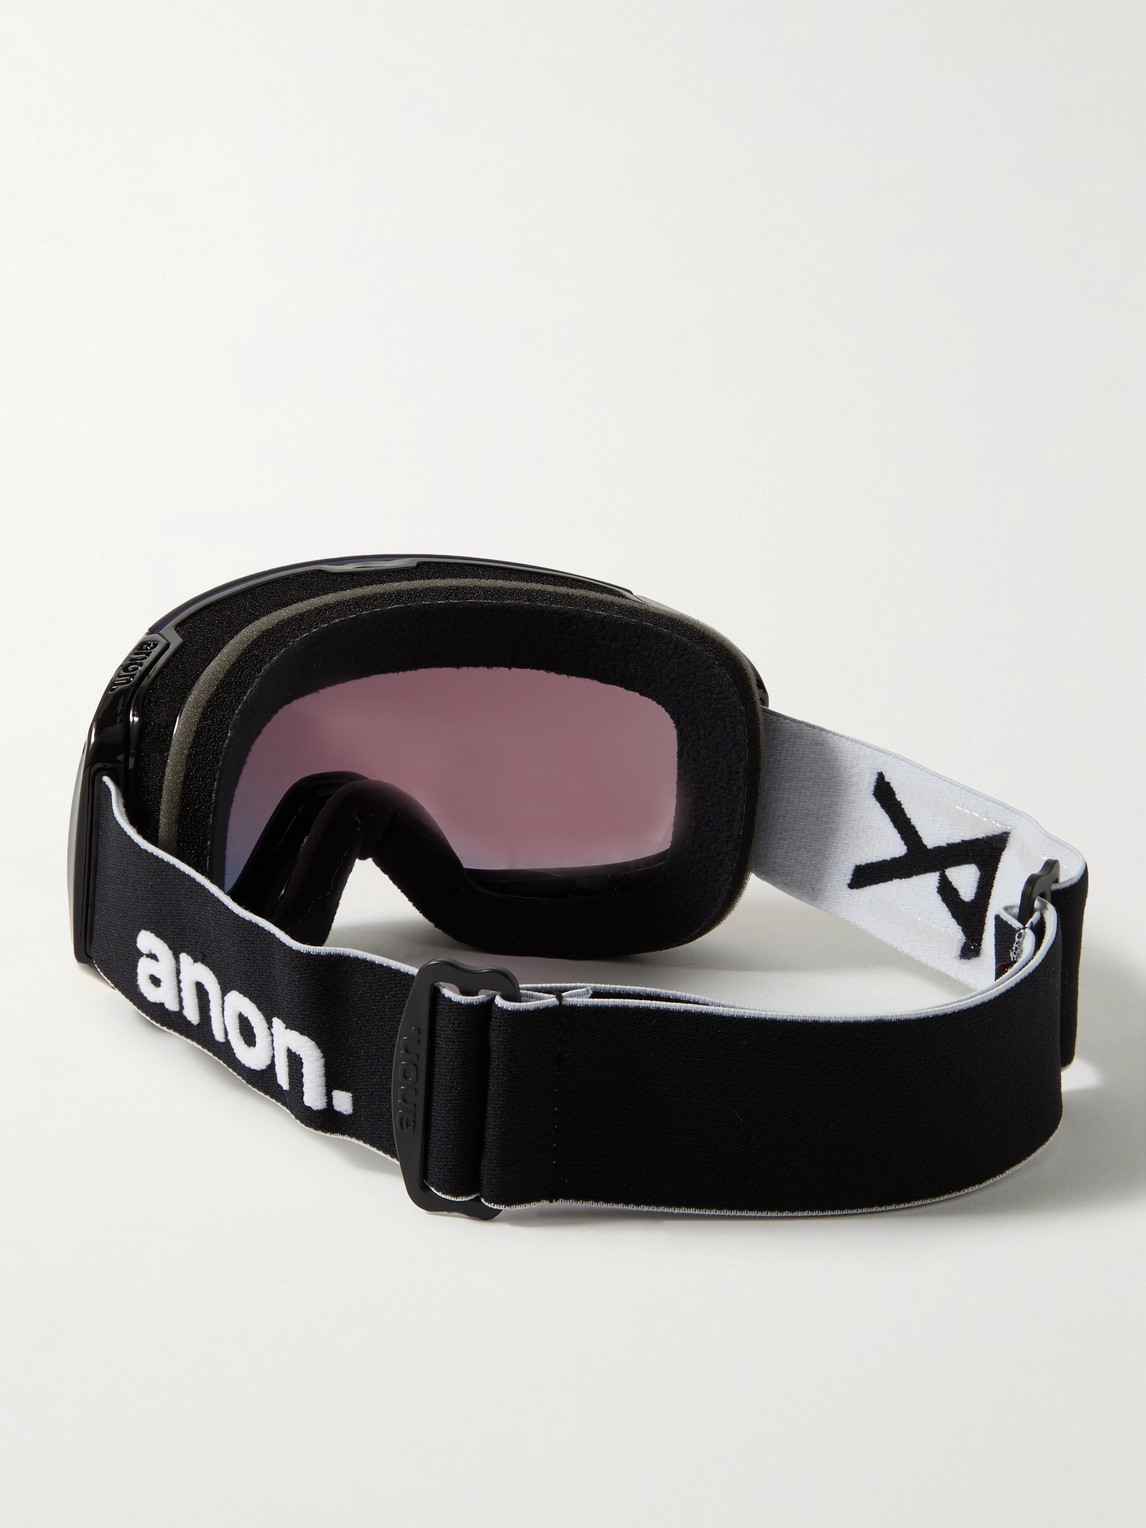 Anon M2 Ski Goggles And Stretch-jersey Face Mask In Black | ModeSens